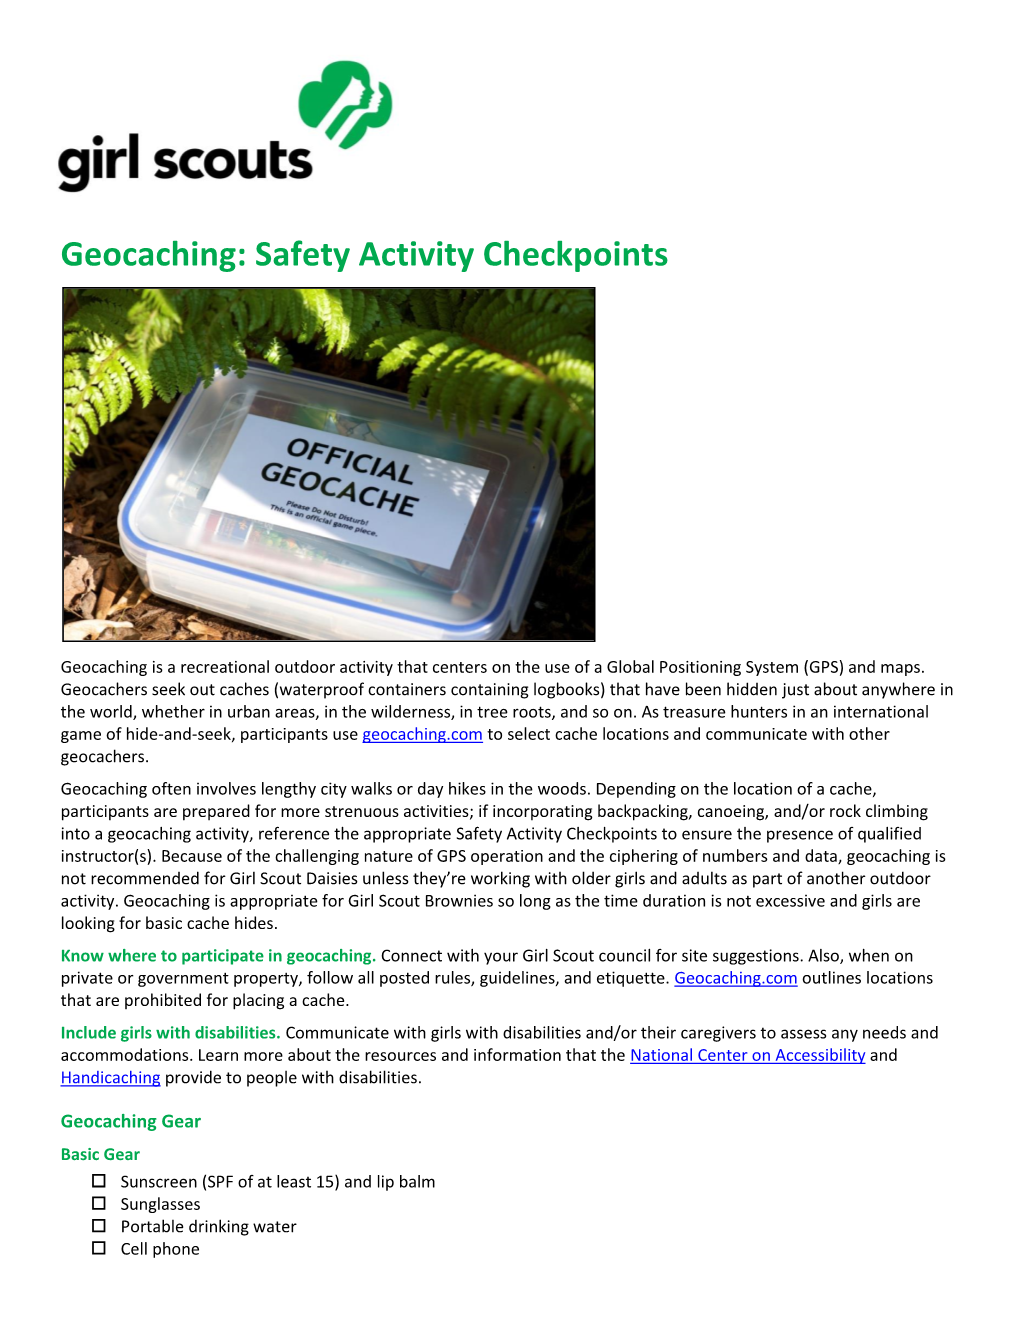 Geocaching: Safety Activity Checkpoints